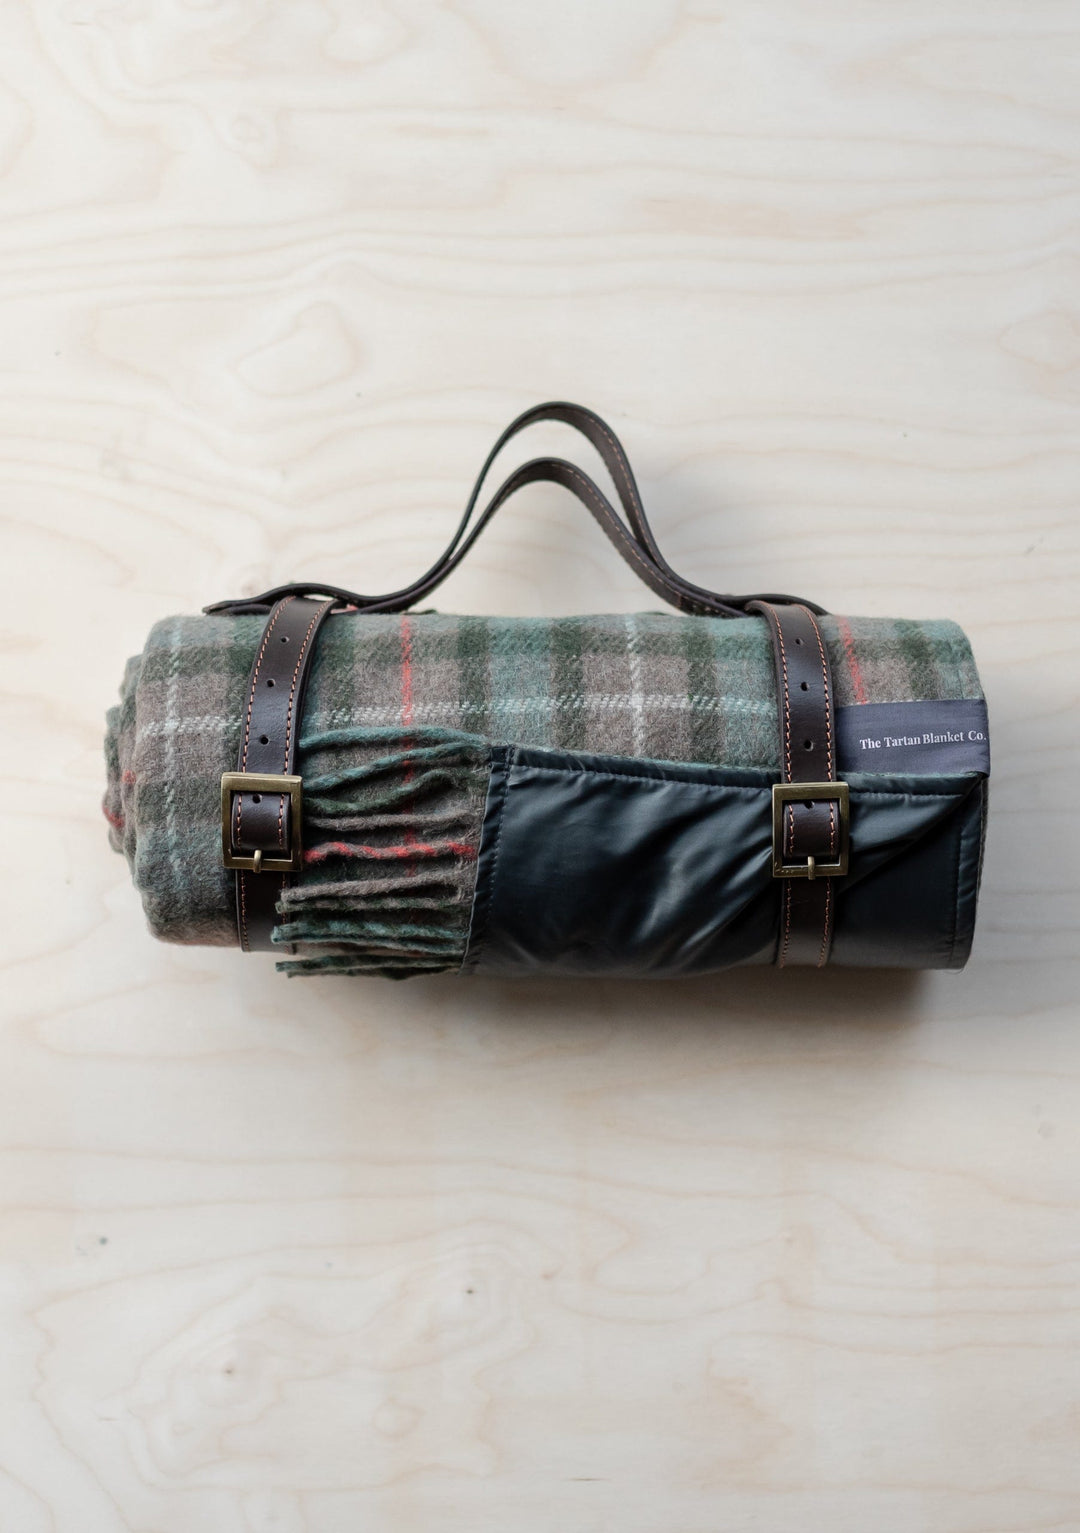 WATERPROOF Backed Wool Picnic Rug / Blanket in Classic Country Plaid Check  with Webbing Carry Strap